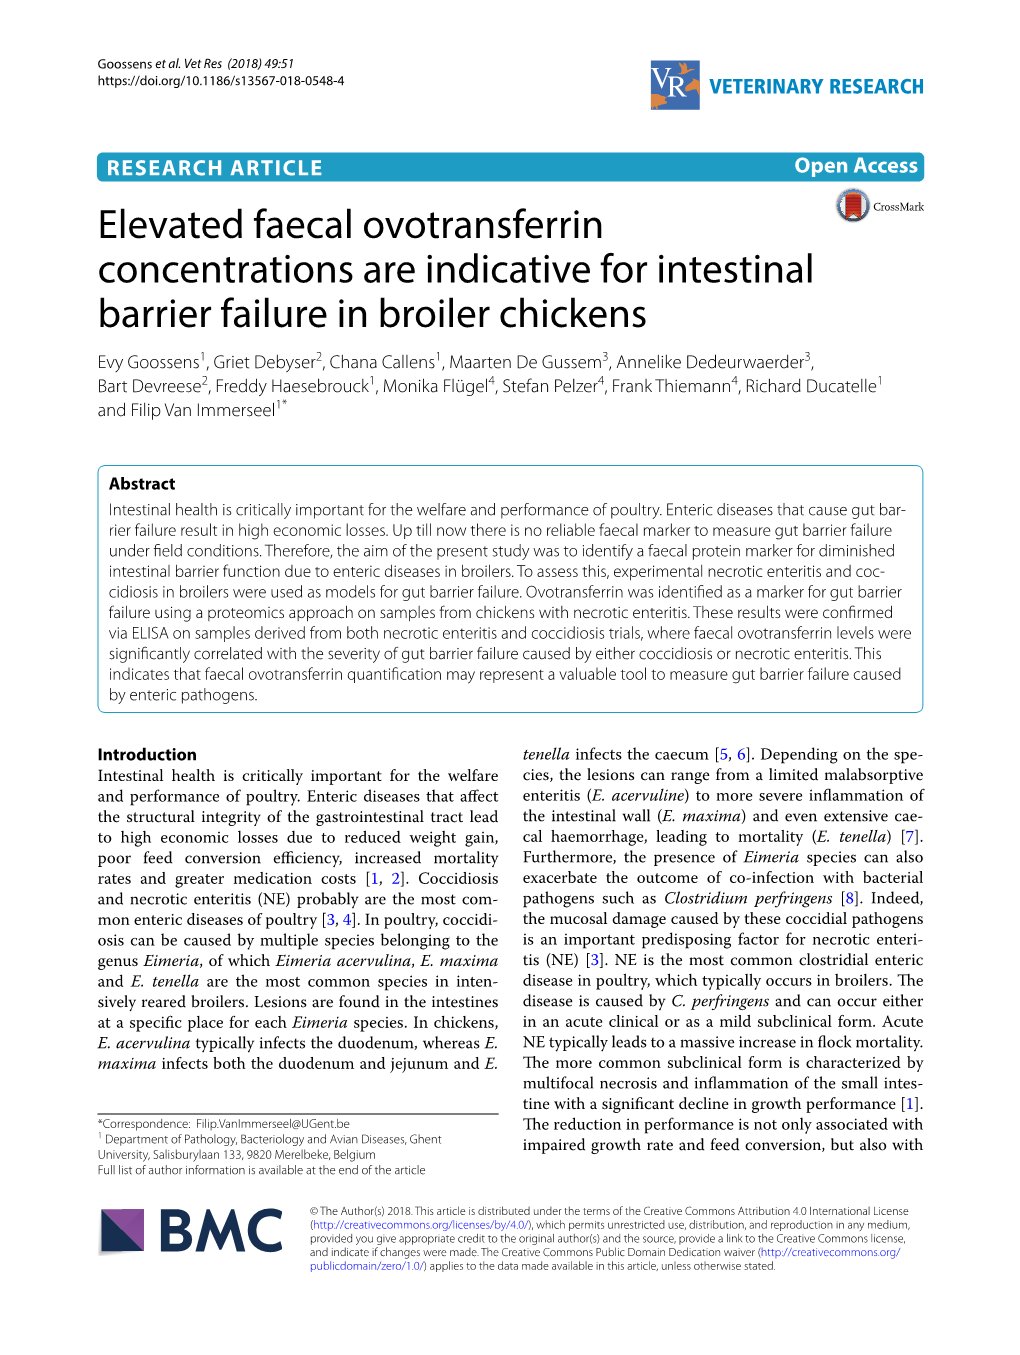 Elevated Faecal Ovotransferrin Concentrations Are Indicative For